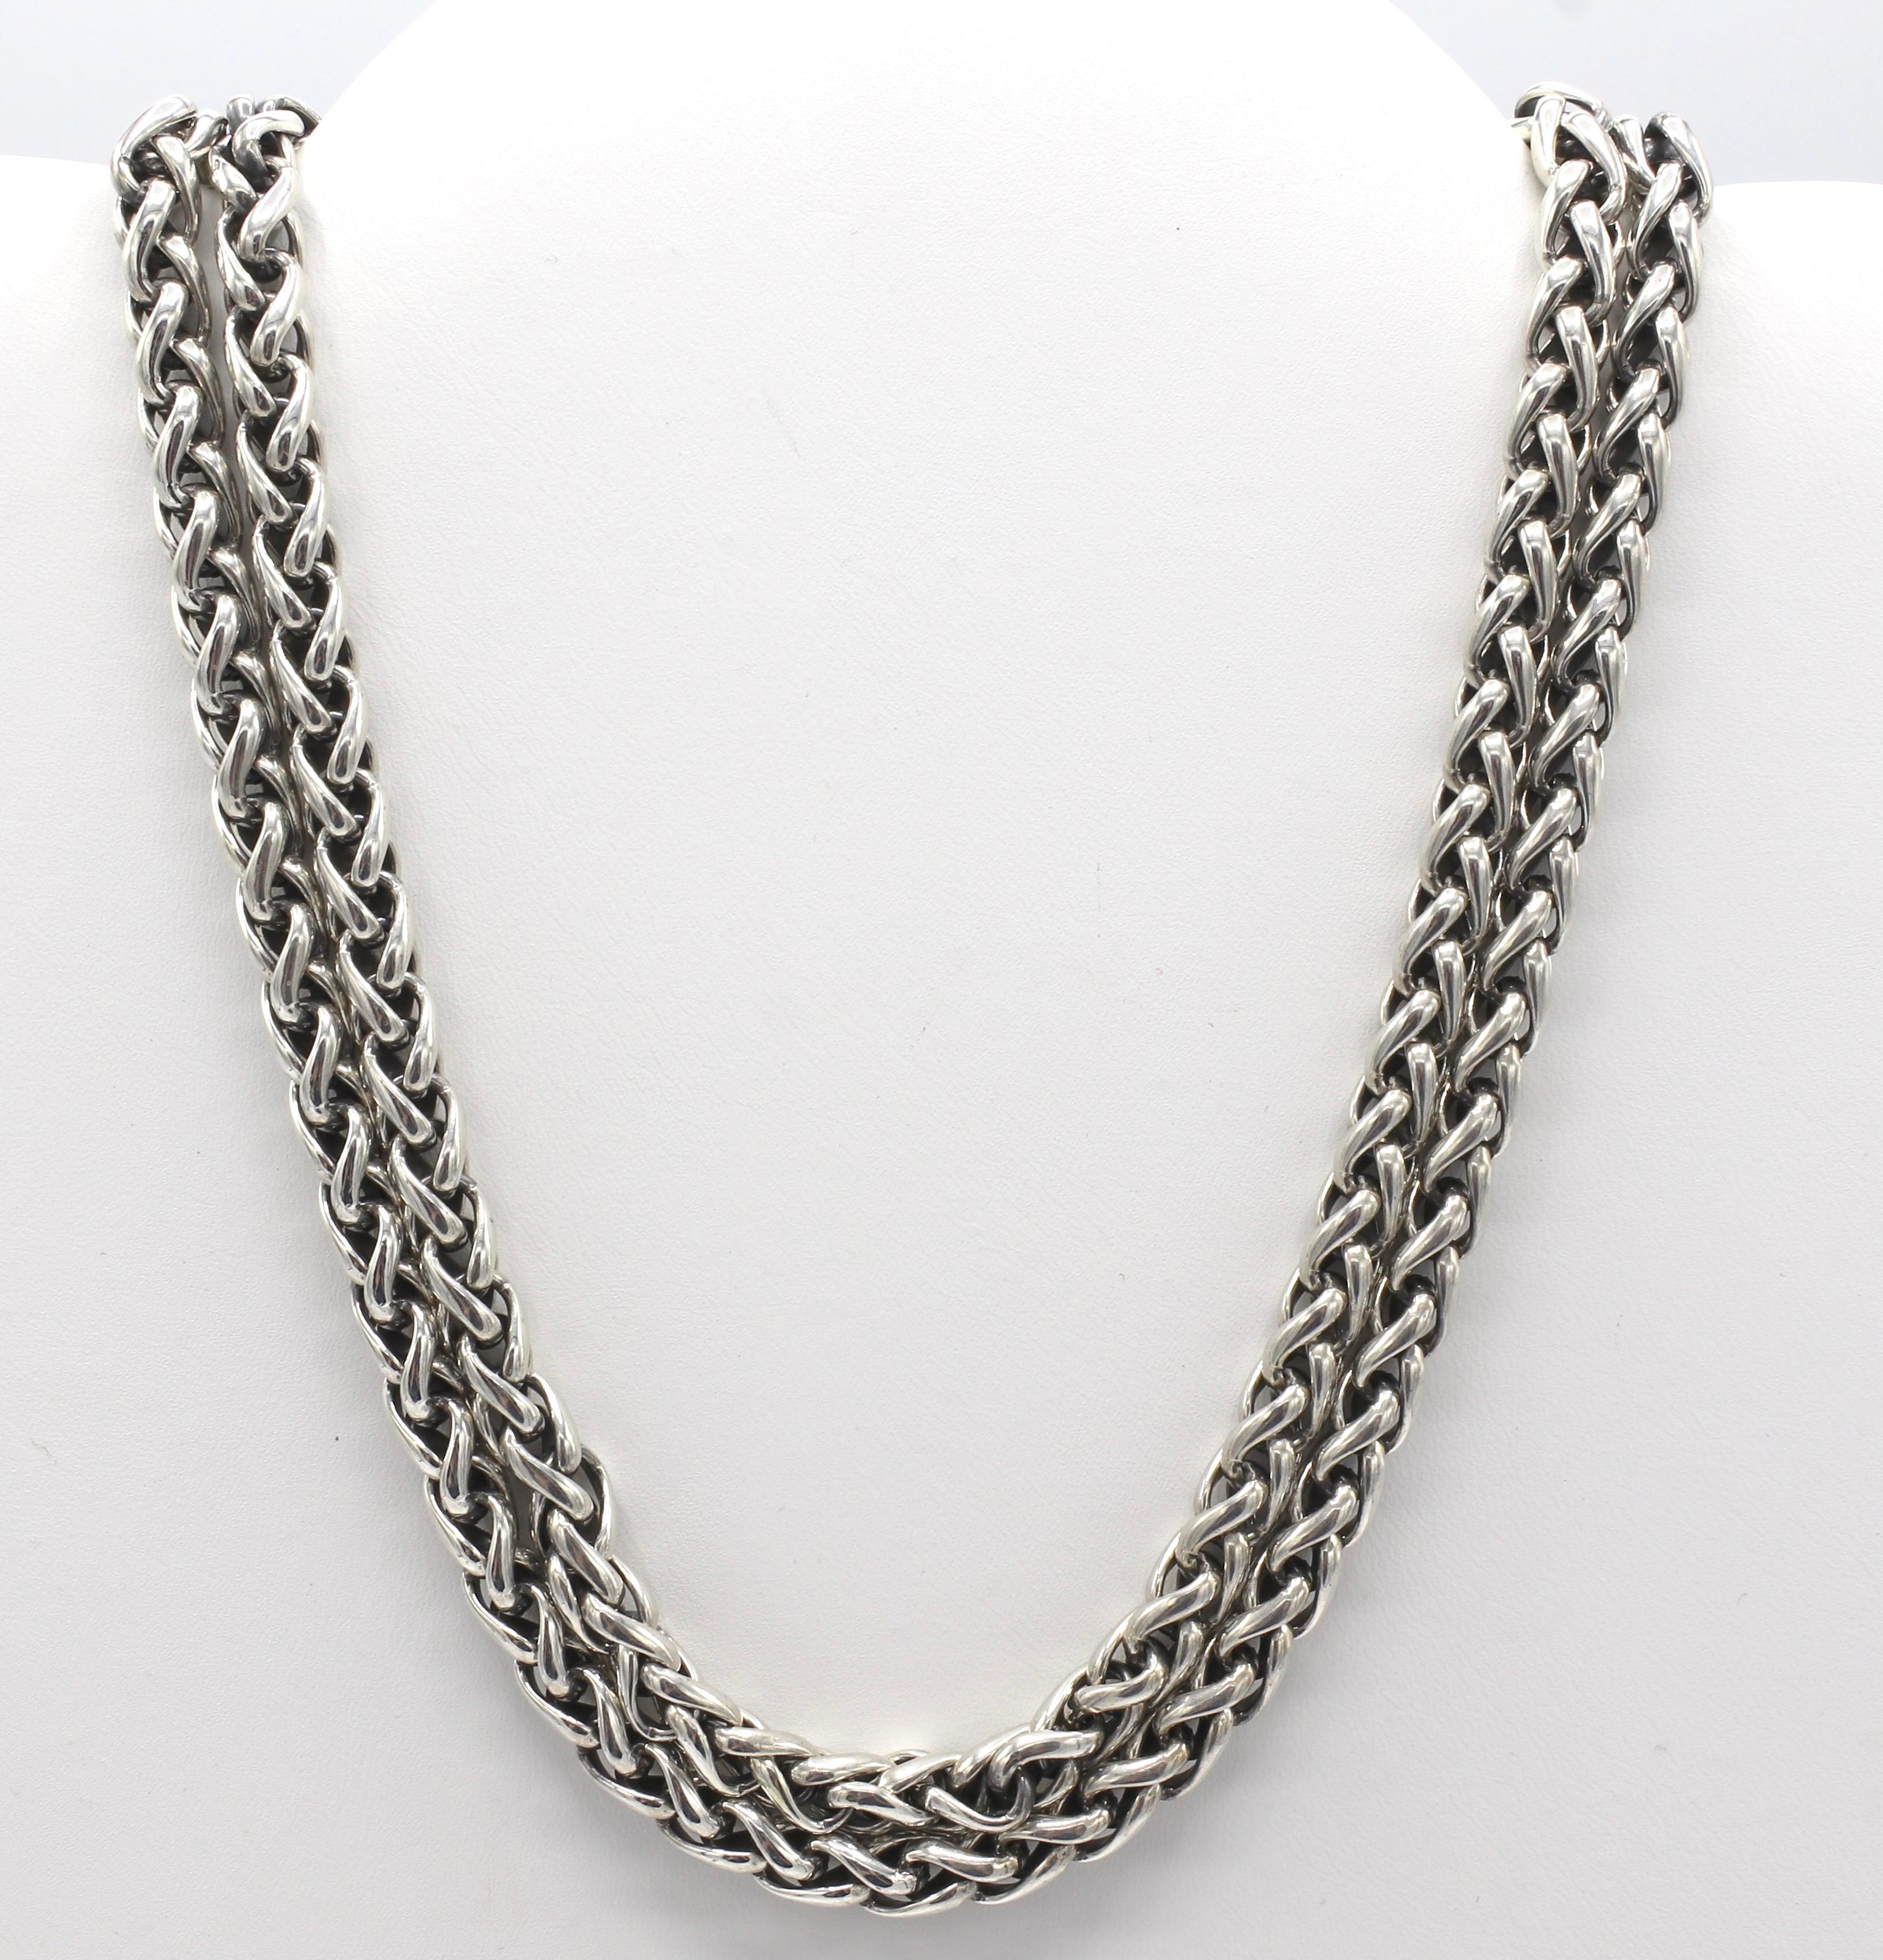 David Yurman Double Wheat Chain Sterling Silver & 14k Yellow Gold Necklace 
Metal: Sterling silver & 14k yellow gold
Weight: 107.41 grams
Length: 16 inches
Chain width: 5.8mm (each)
Strands: Two (2)